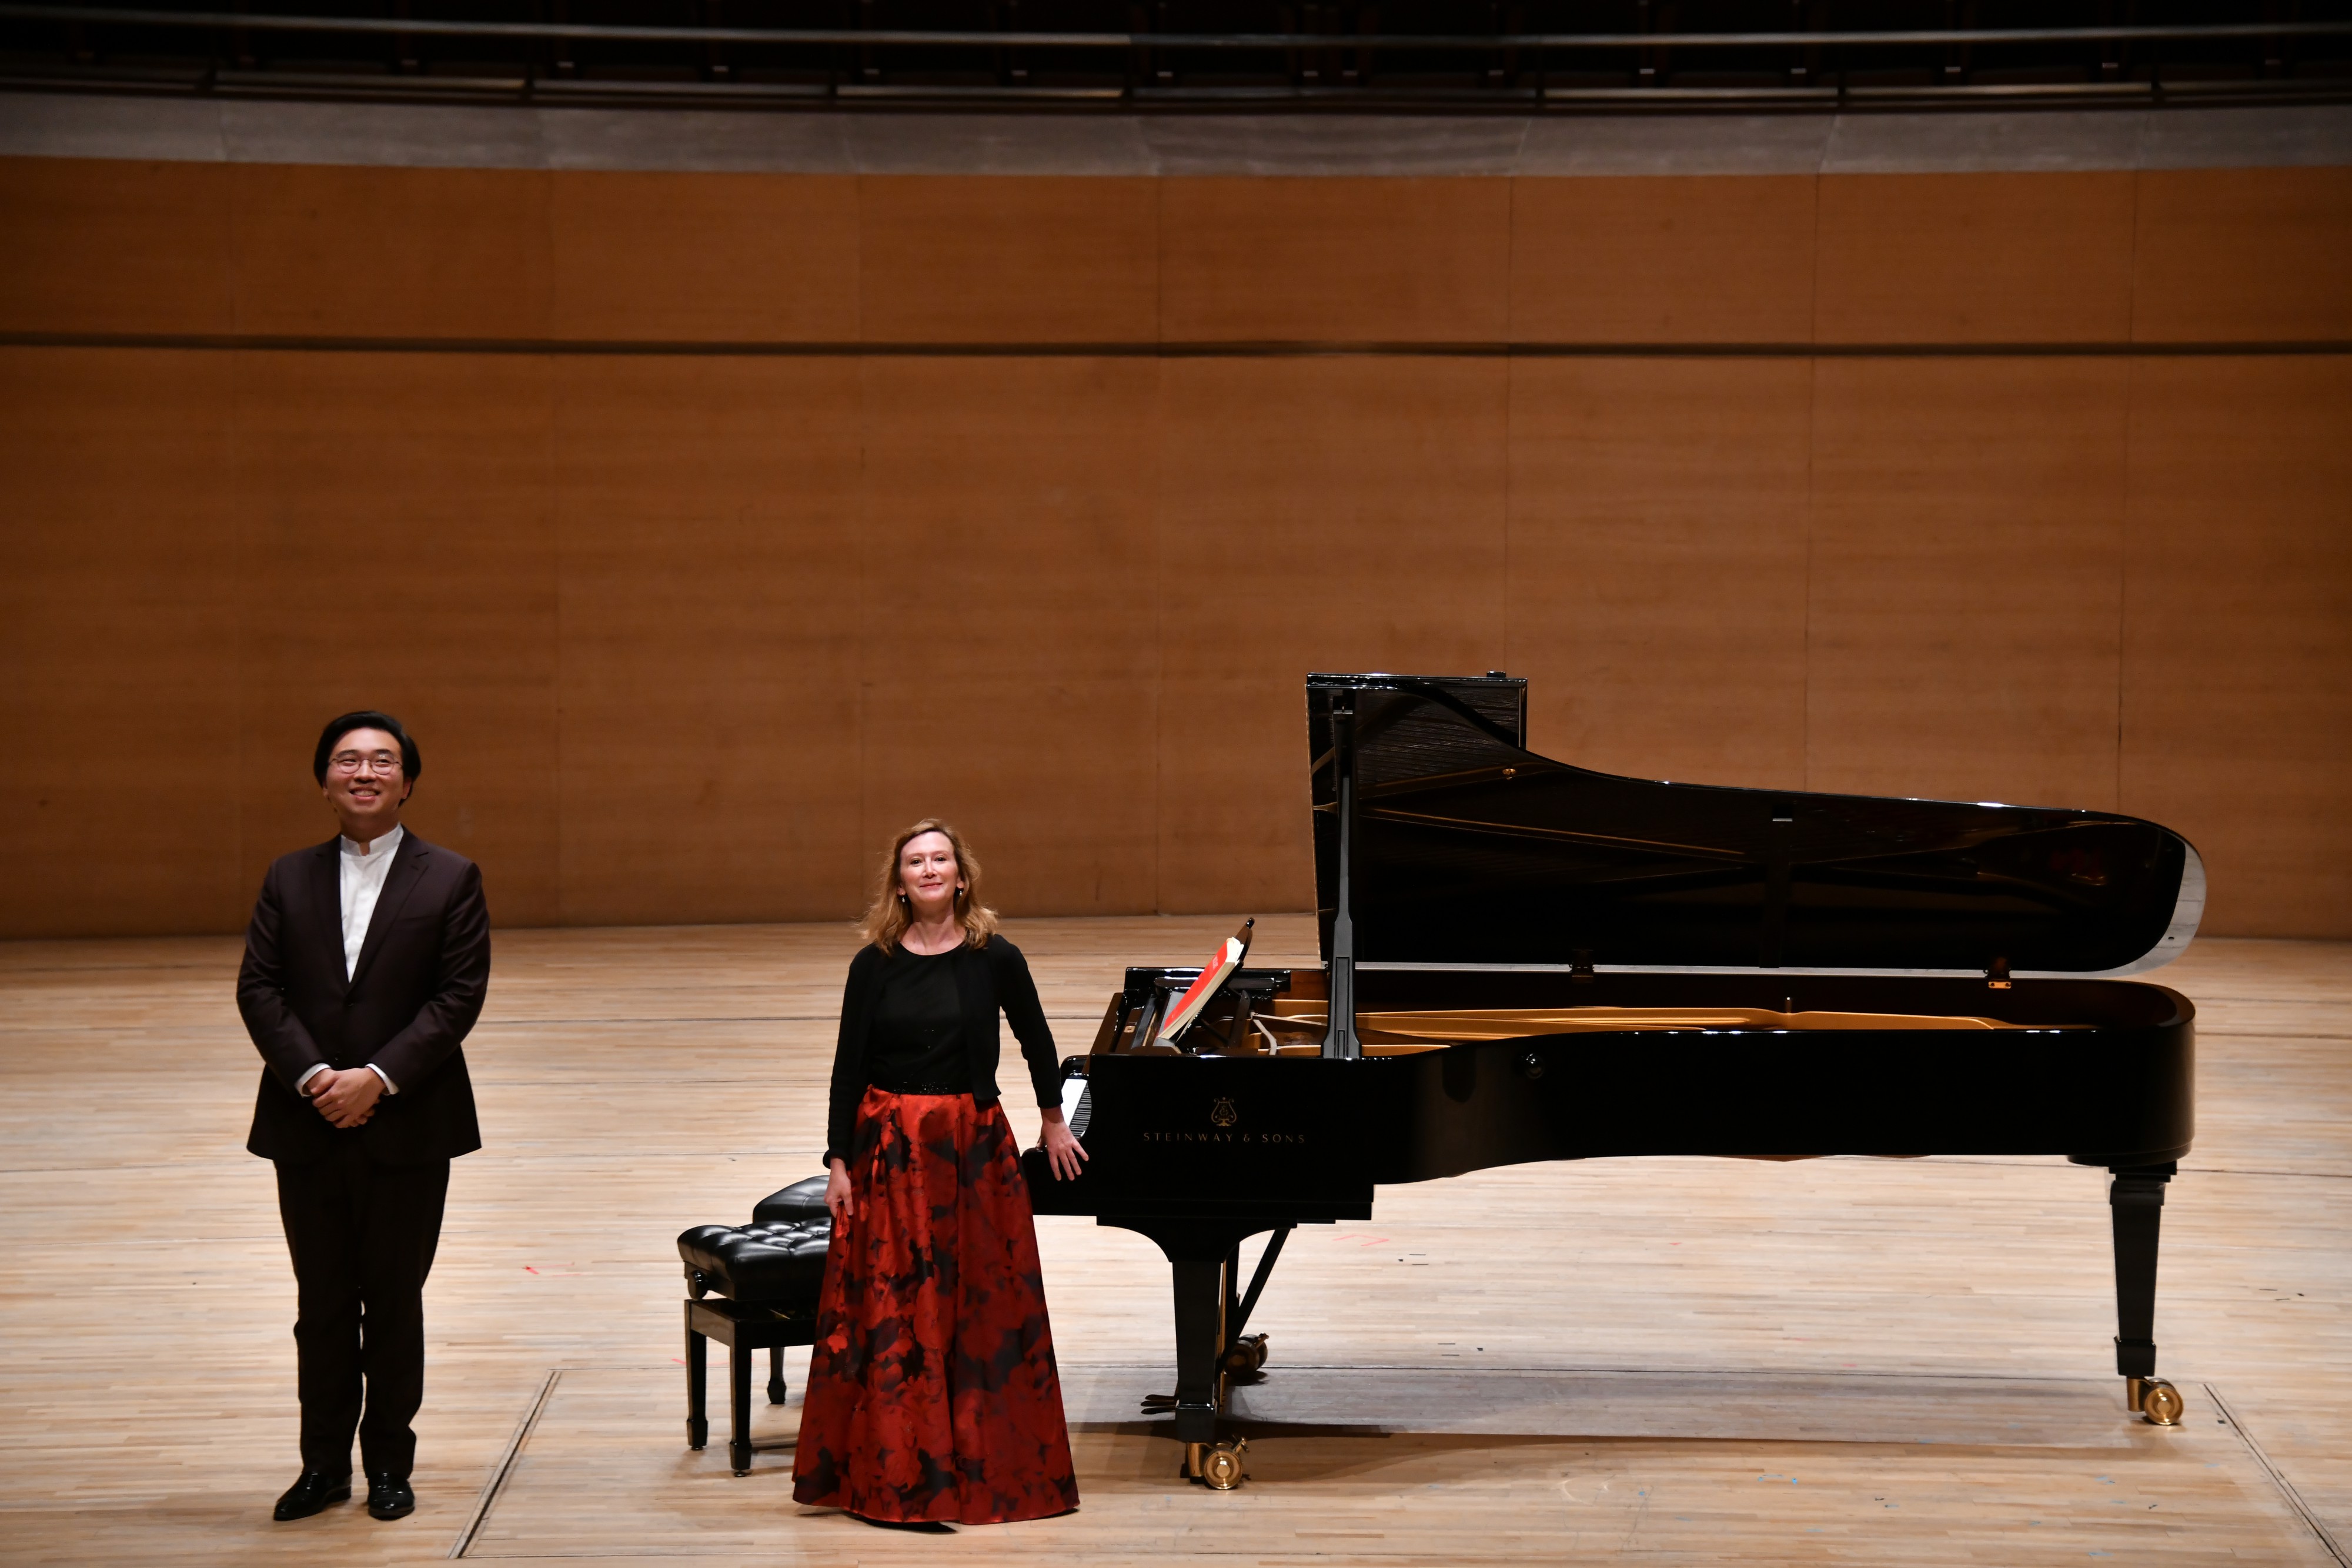 Audrey Axinn with pianist and Tianjin Juilliard resident faculty, Alvin Zhu, performing at The Tianjin Grand Theatre in China. Photo credit: Duan Chao